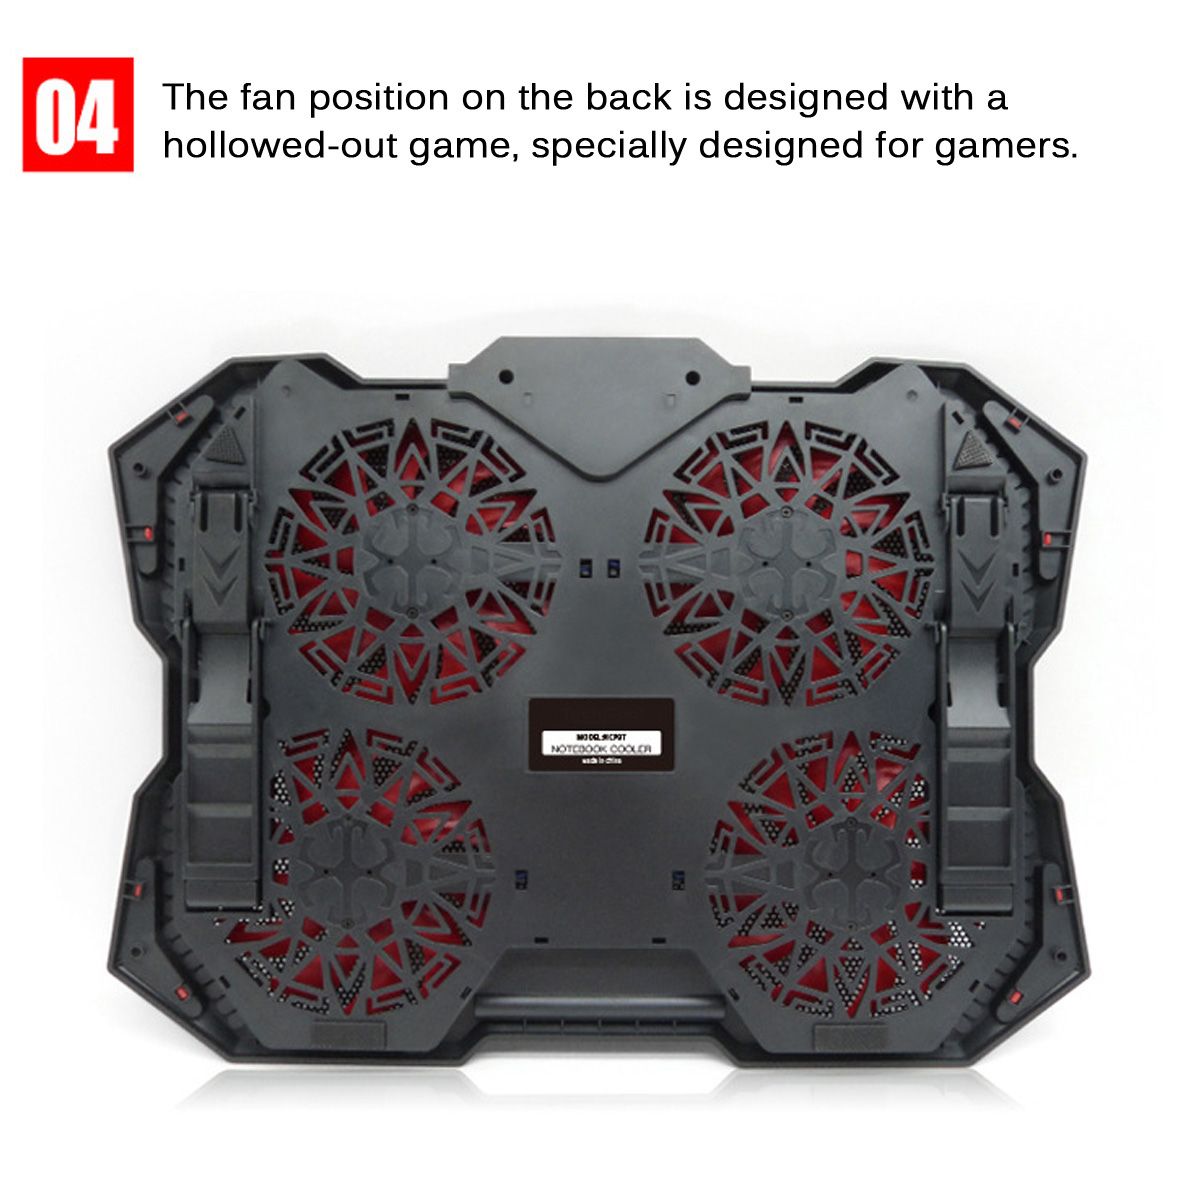 Laptop-Cooling-Pads-4-Fans-3-Levels-Of-Lifting-USB-Port-Air-Cooling-Noiseless-Stand-For-17-inches-an-1669559